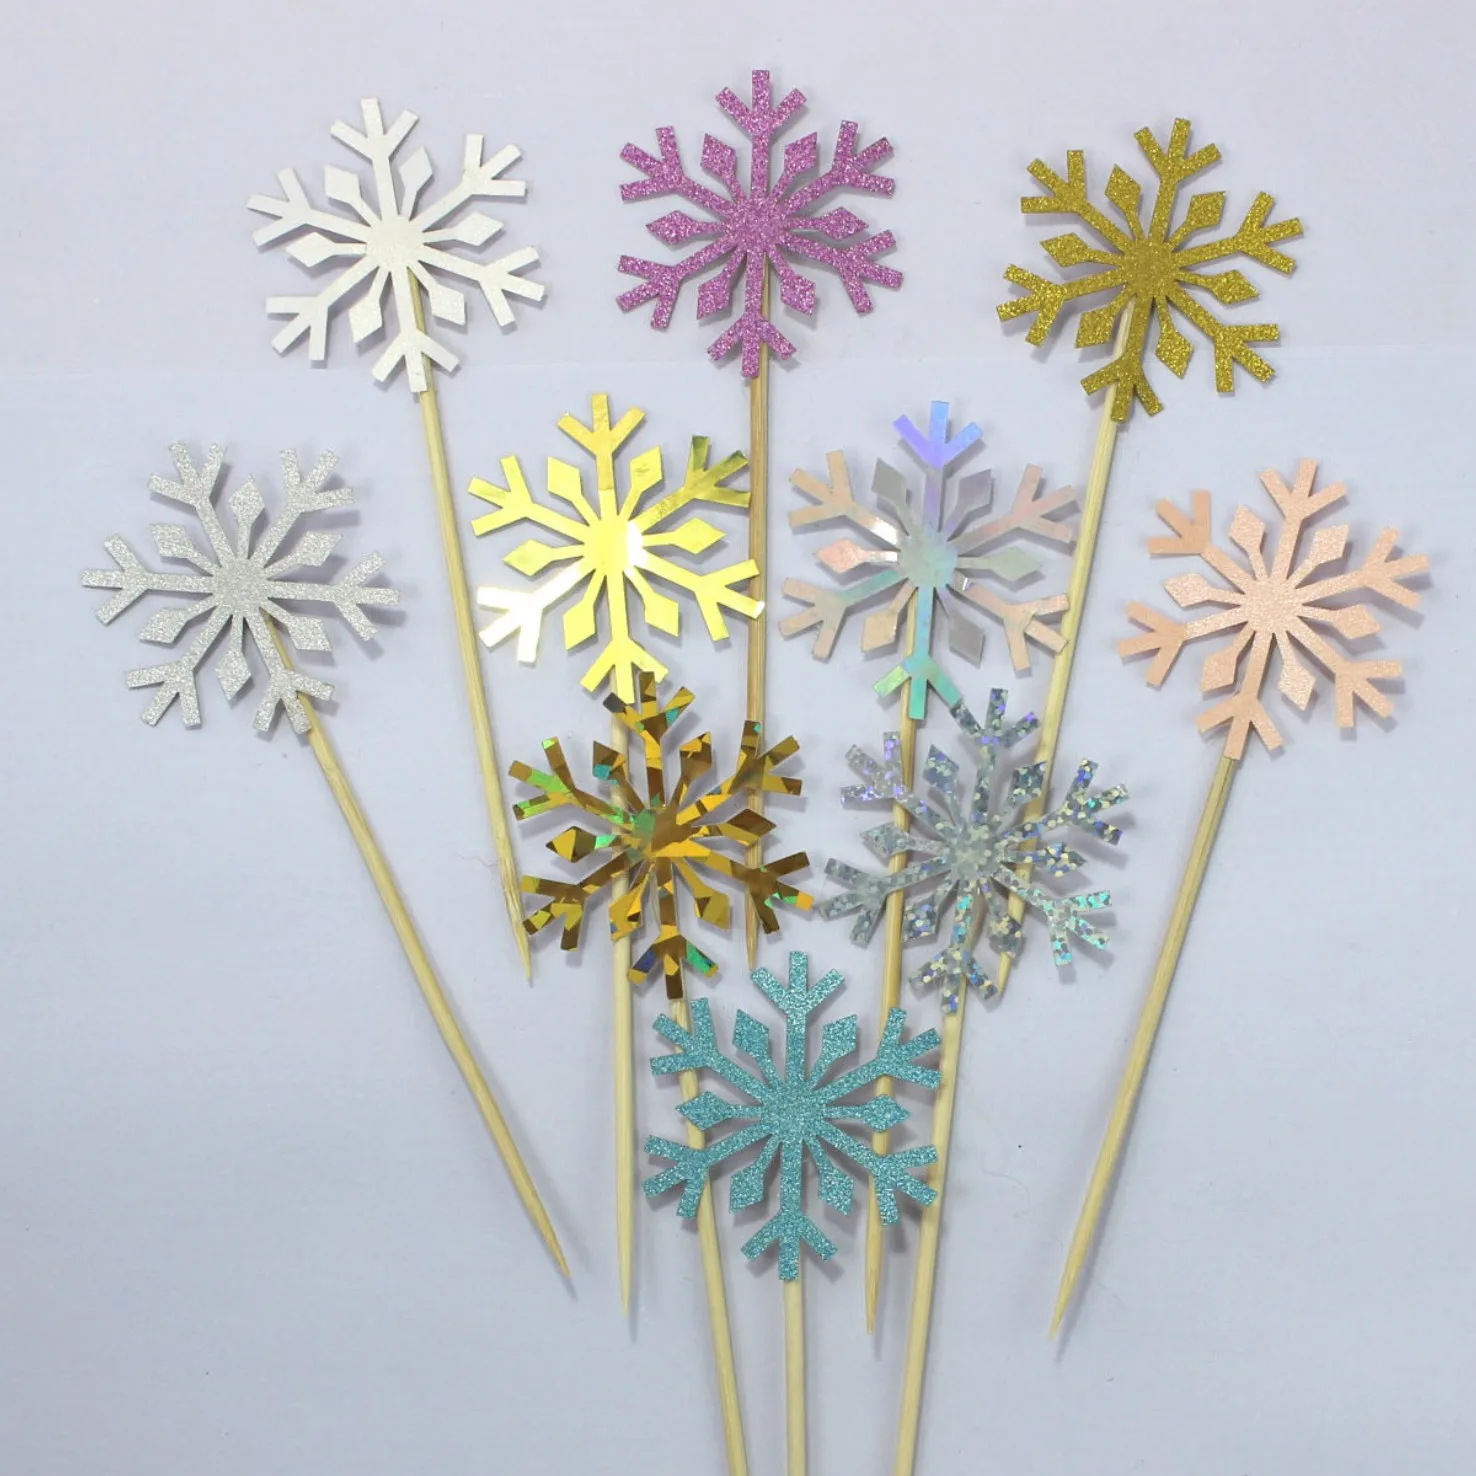 

Ychon Glitter Snowflake Cupcake Toppers Picks Gold cake Topper for Birthday Christmas Party Cake Decorations